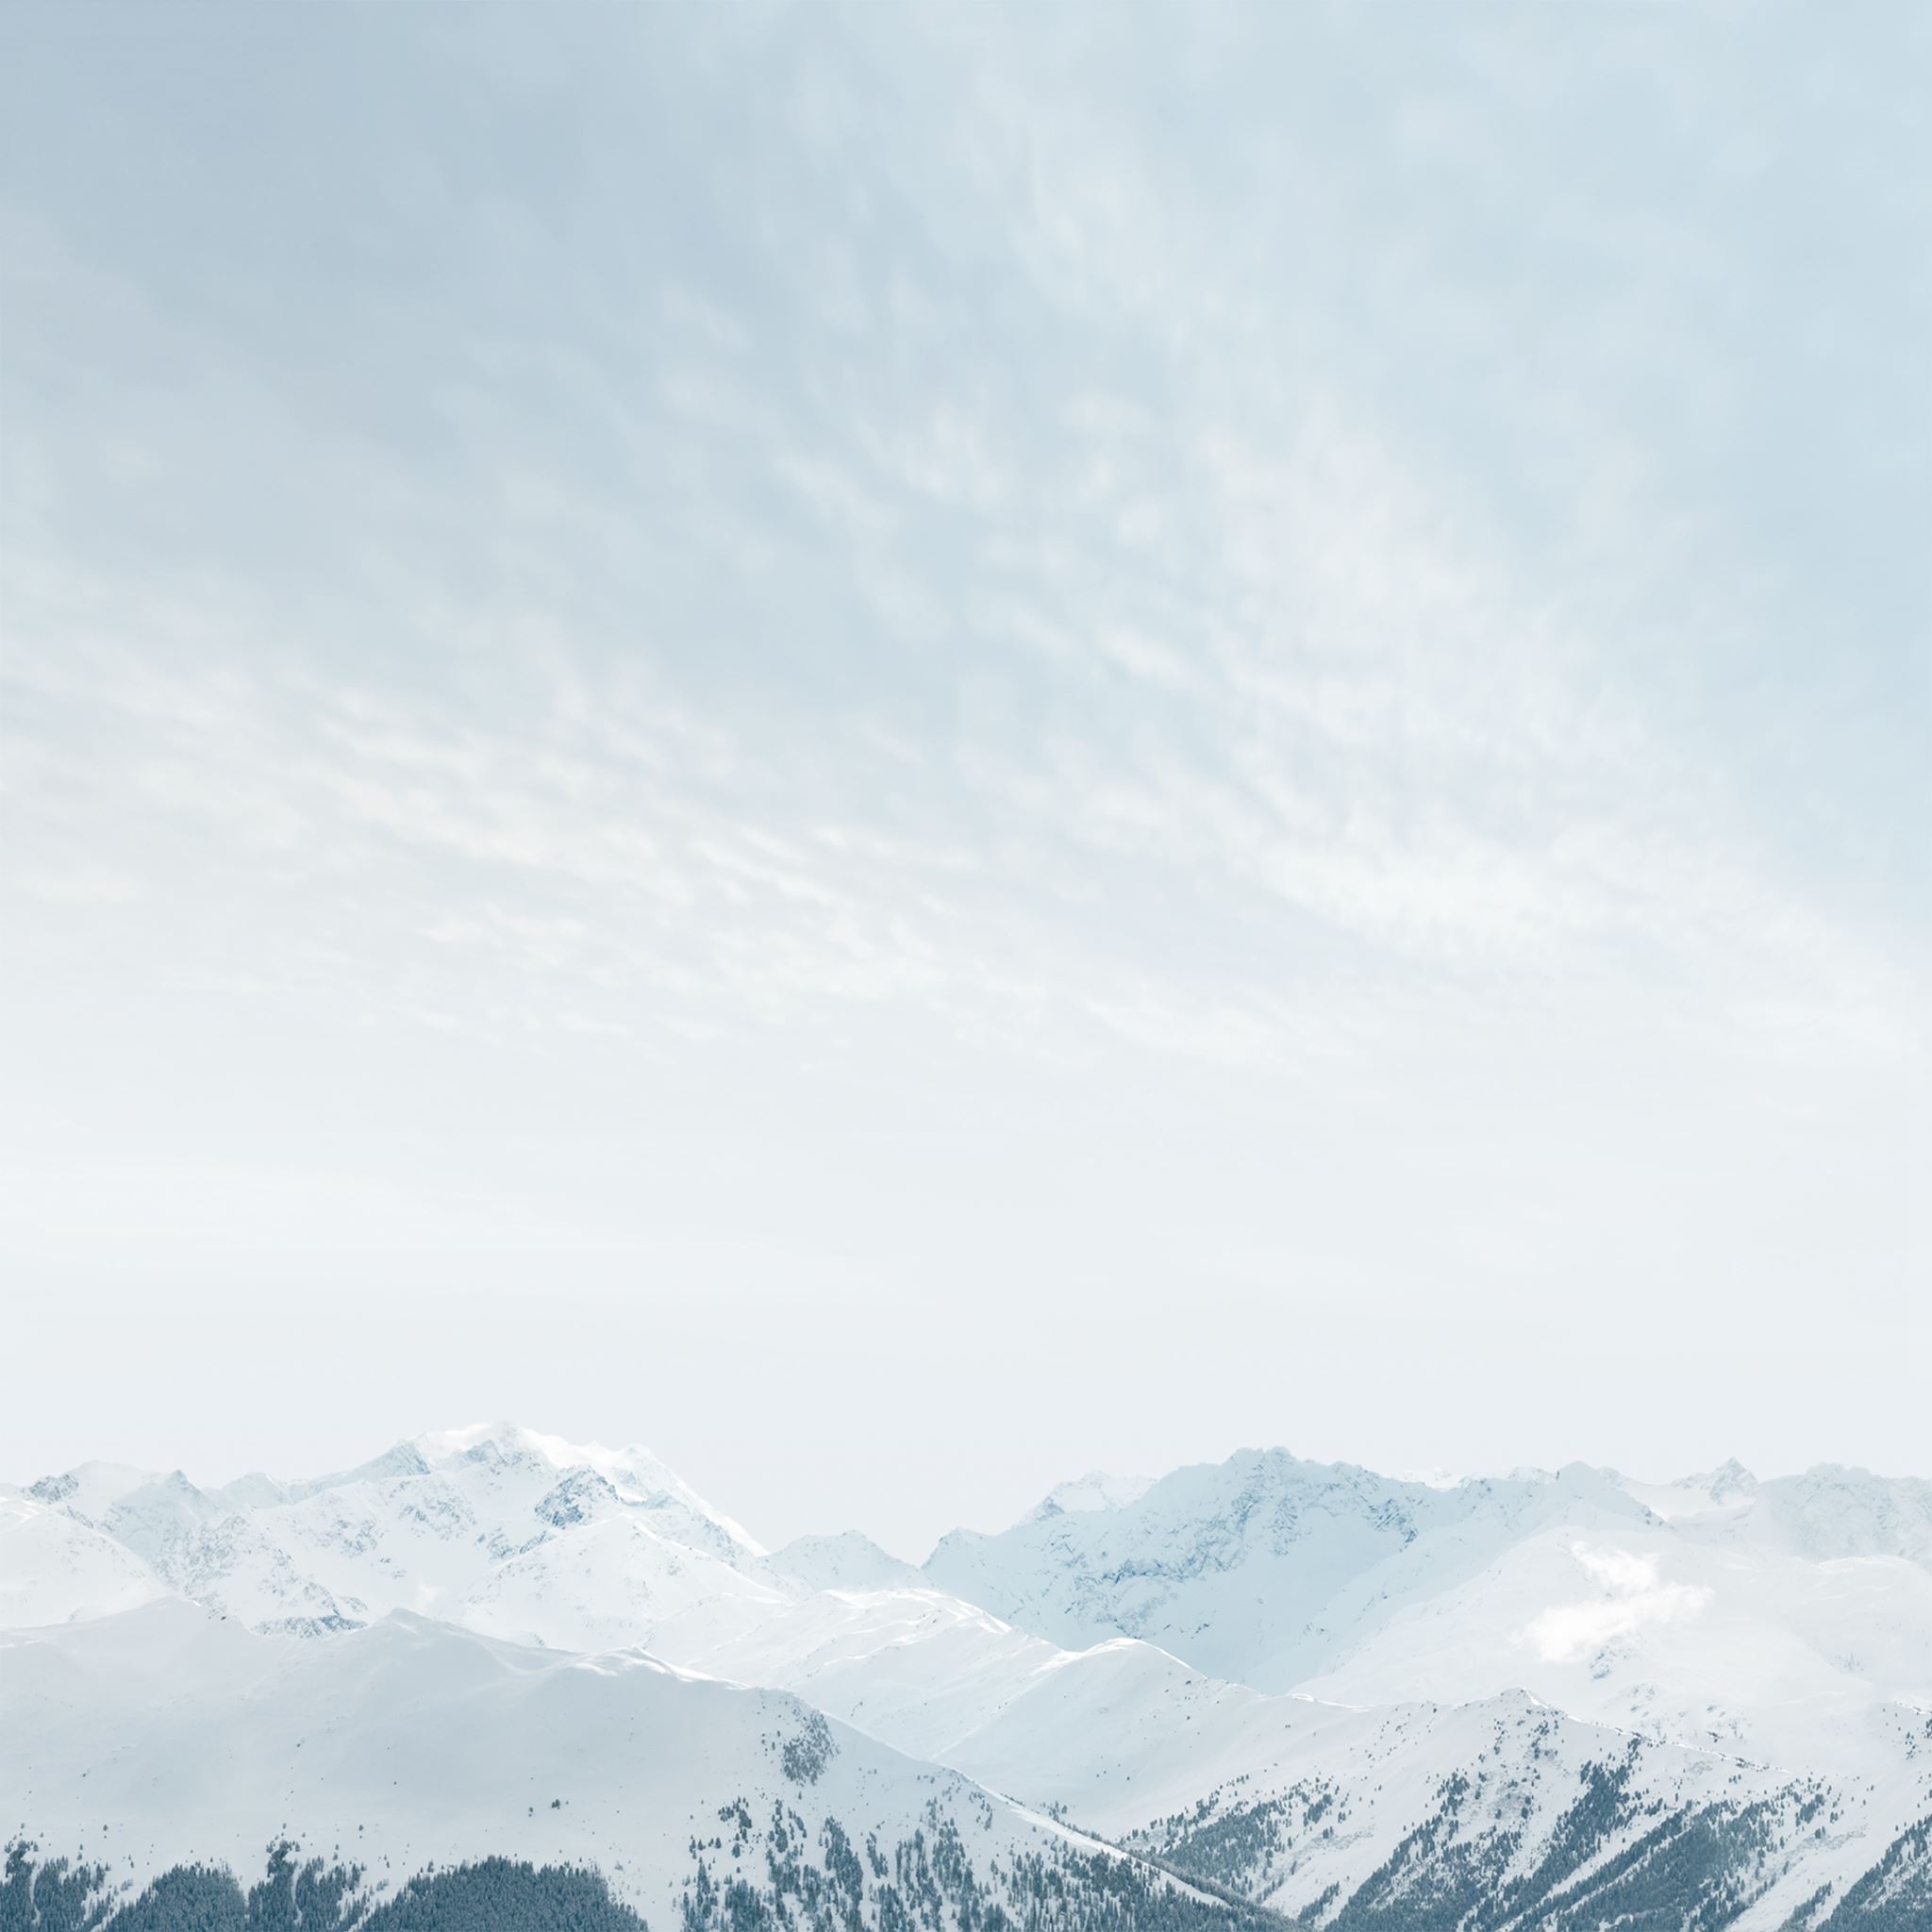 Nature Pure Snowy Mountains Landscape iPad Air wallpaper 